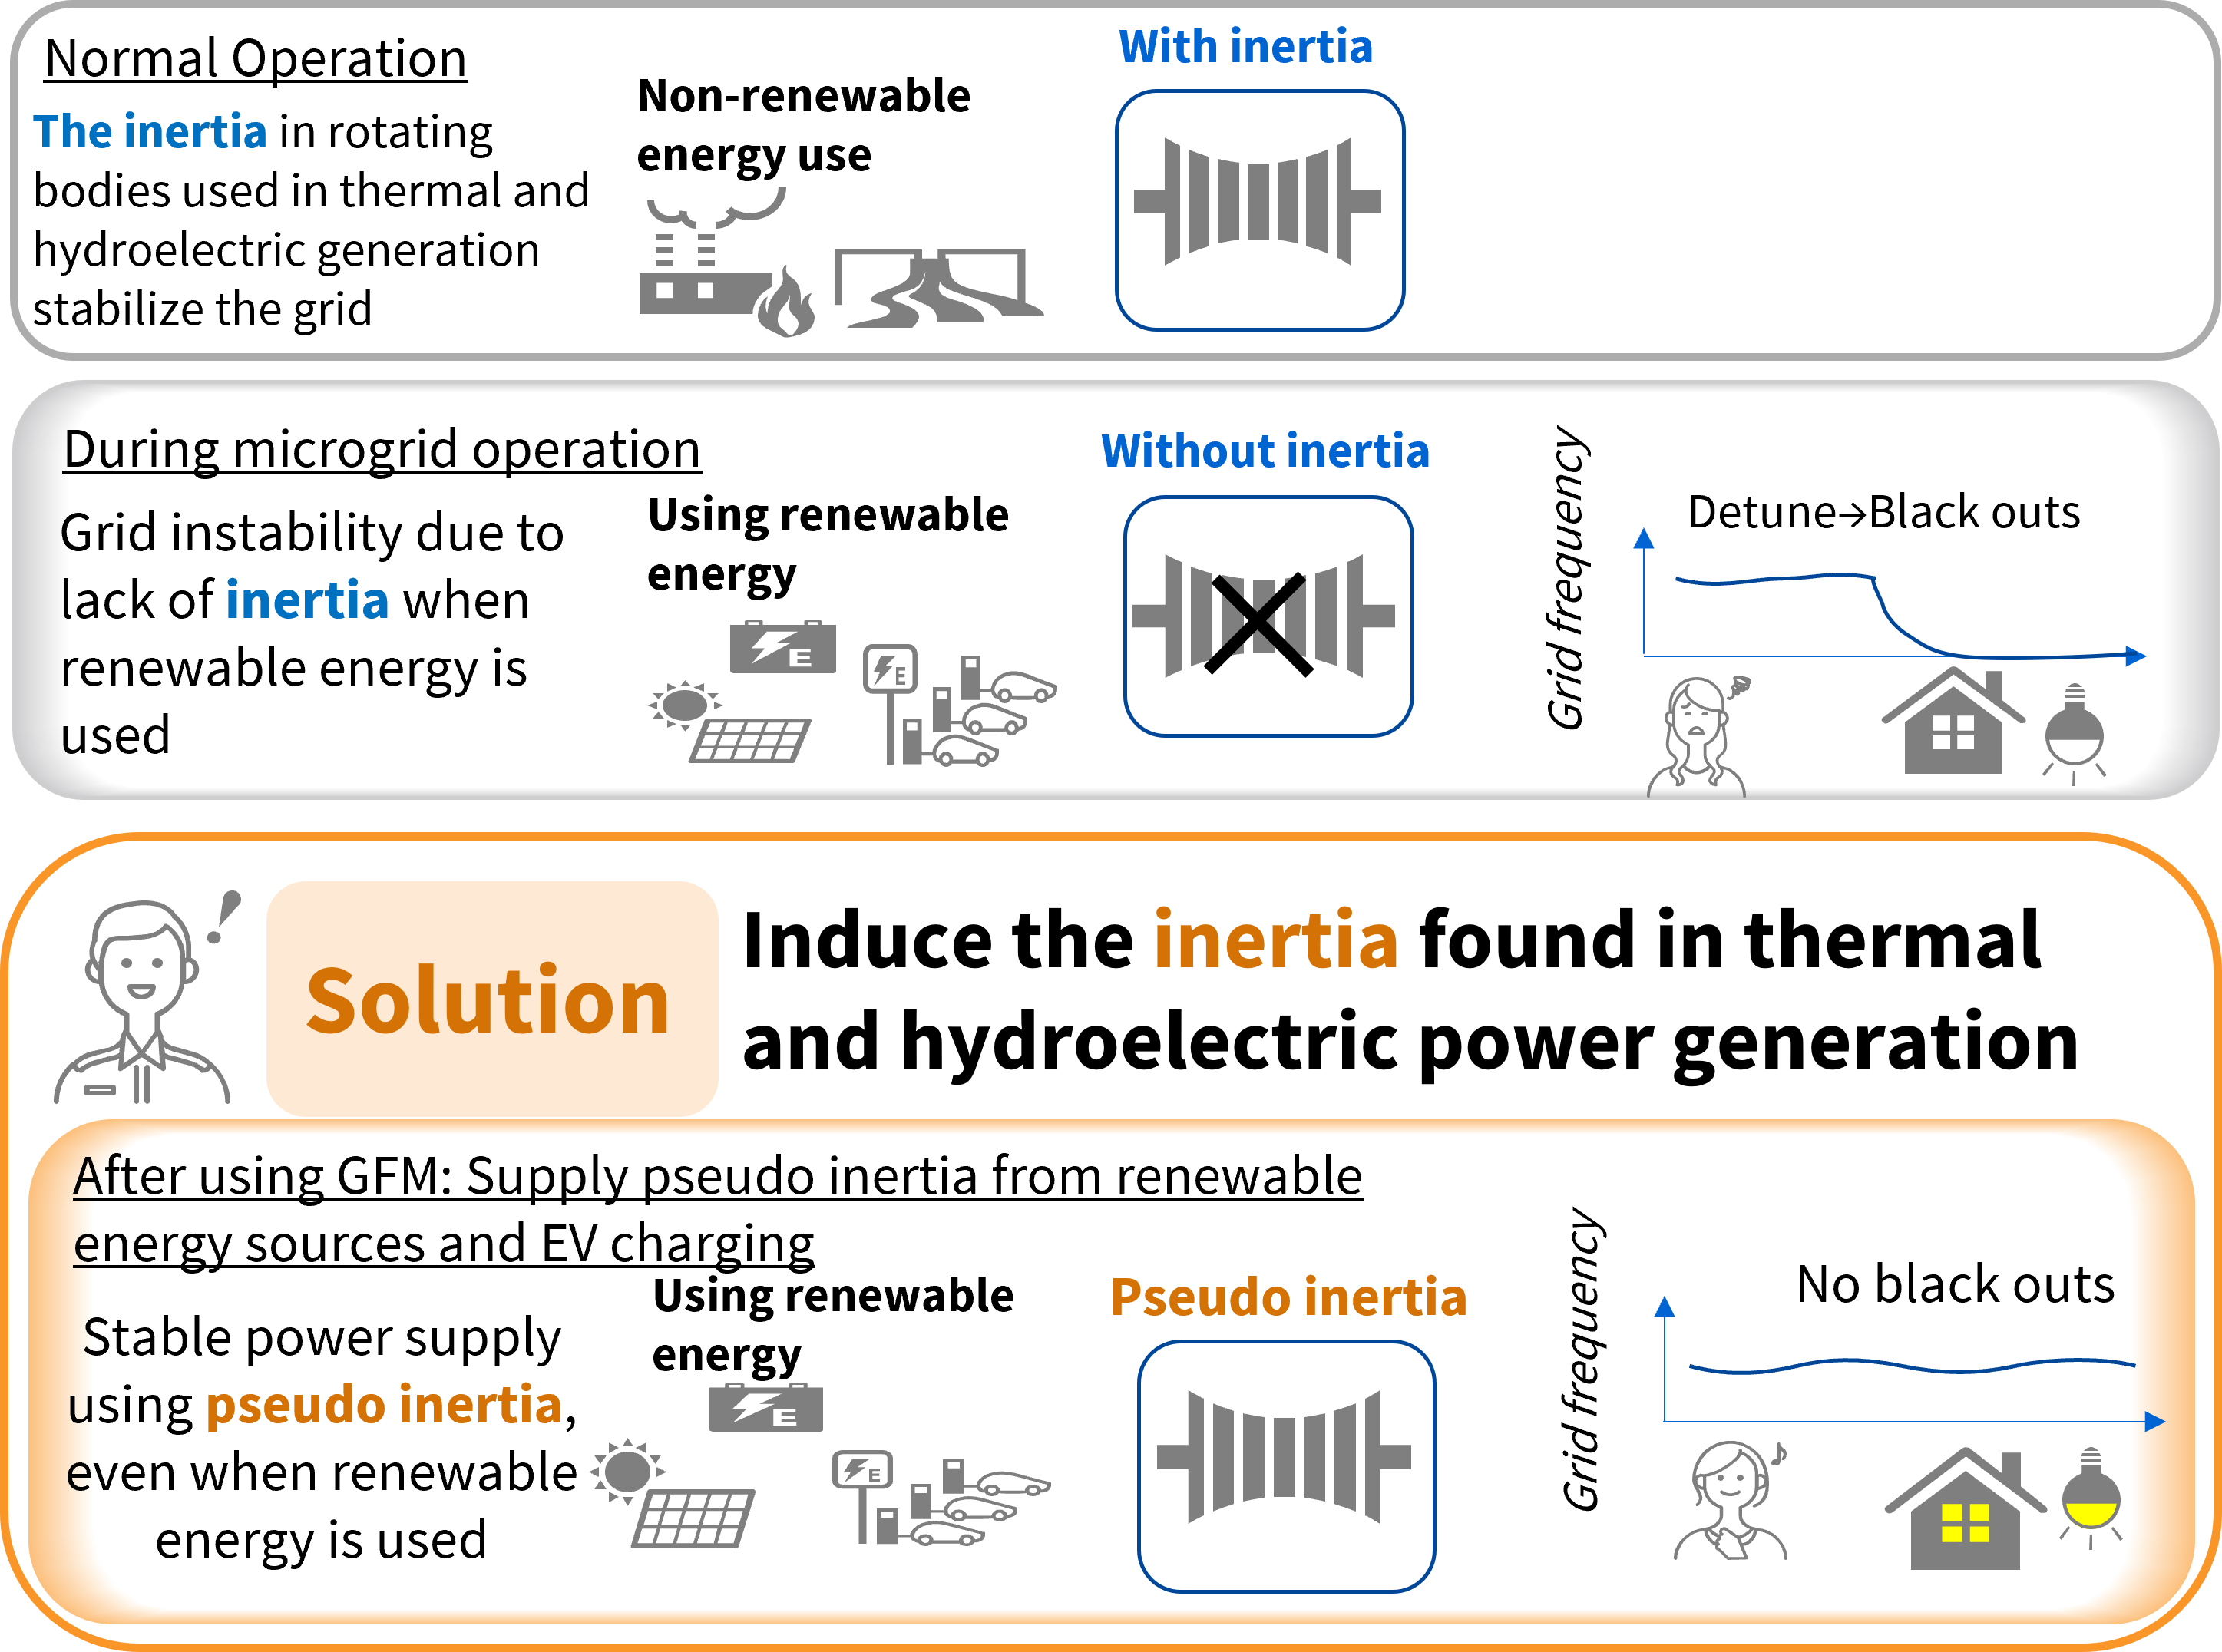 Pseudo inertia realized by the GFM inverter secured stable power supply, even with renewable sources